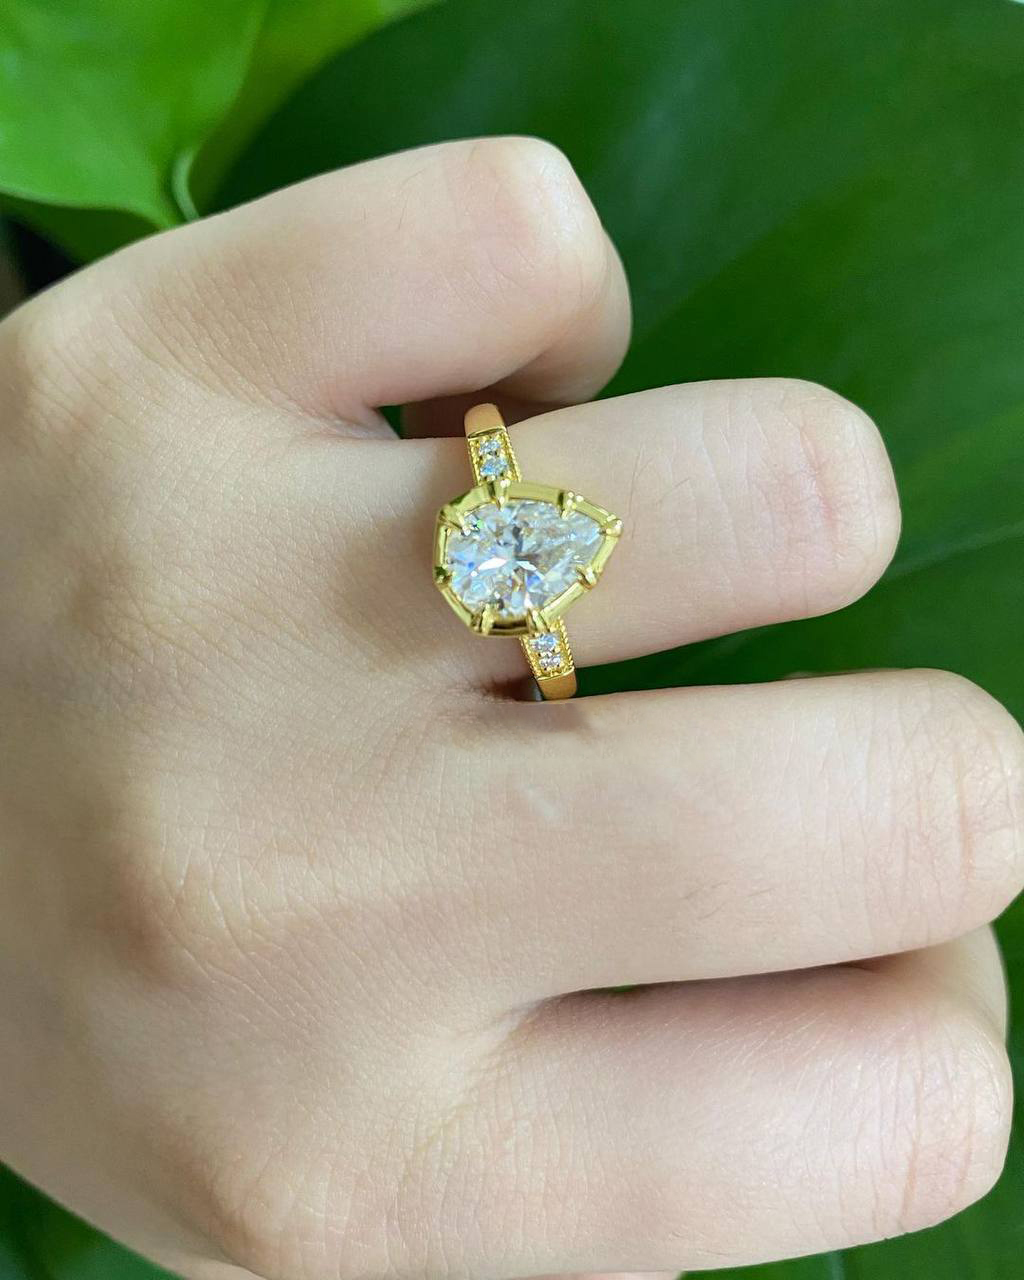 2 Ct Pear Shaped CZ Engagement Ring, Pear Solitaire Ring, Wedding,Bridal Ring Set, Solid White/Yellow/Rose Gold, Minimalist Dainty Gift Ring | Save 33% - Rajasthan Living 10